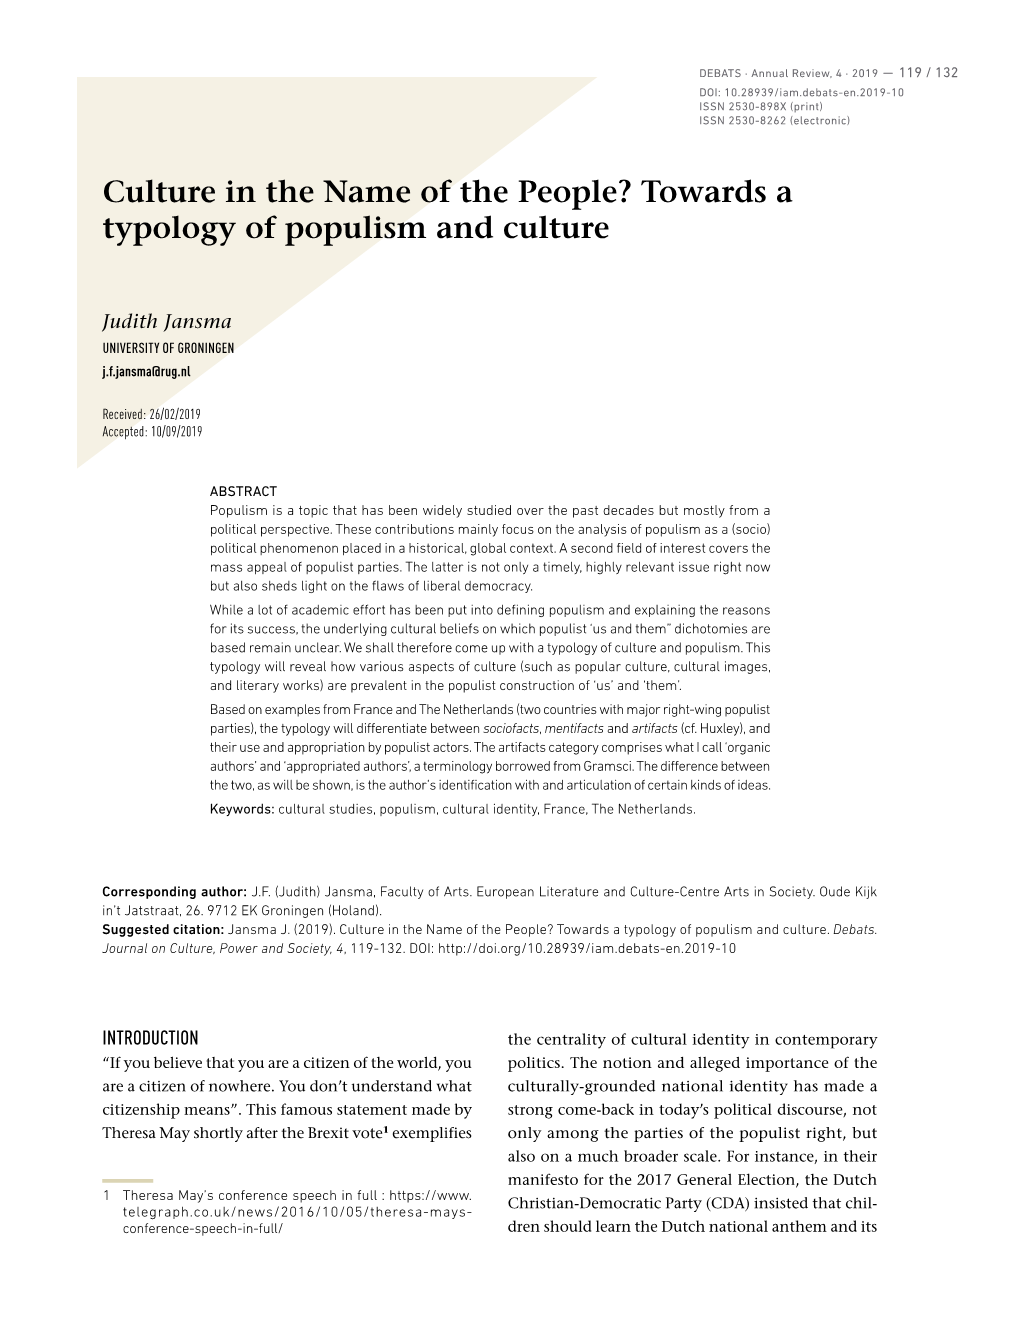 Towards a Typology of Populism and Culture